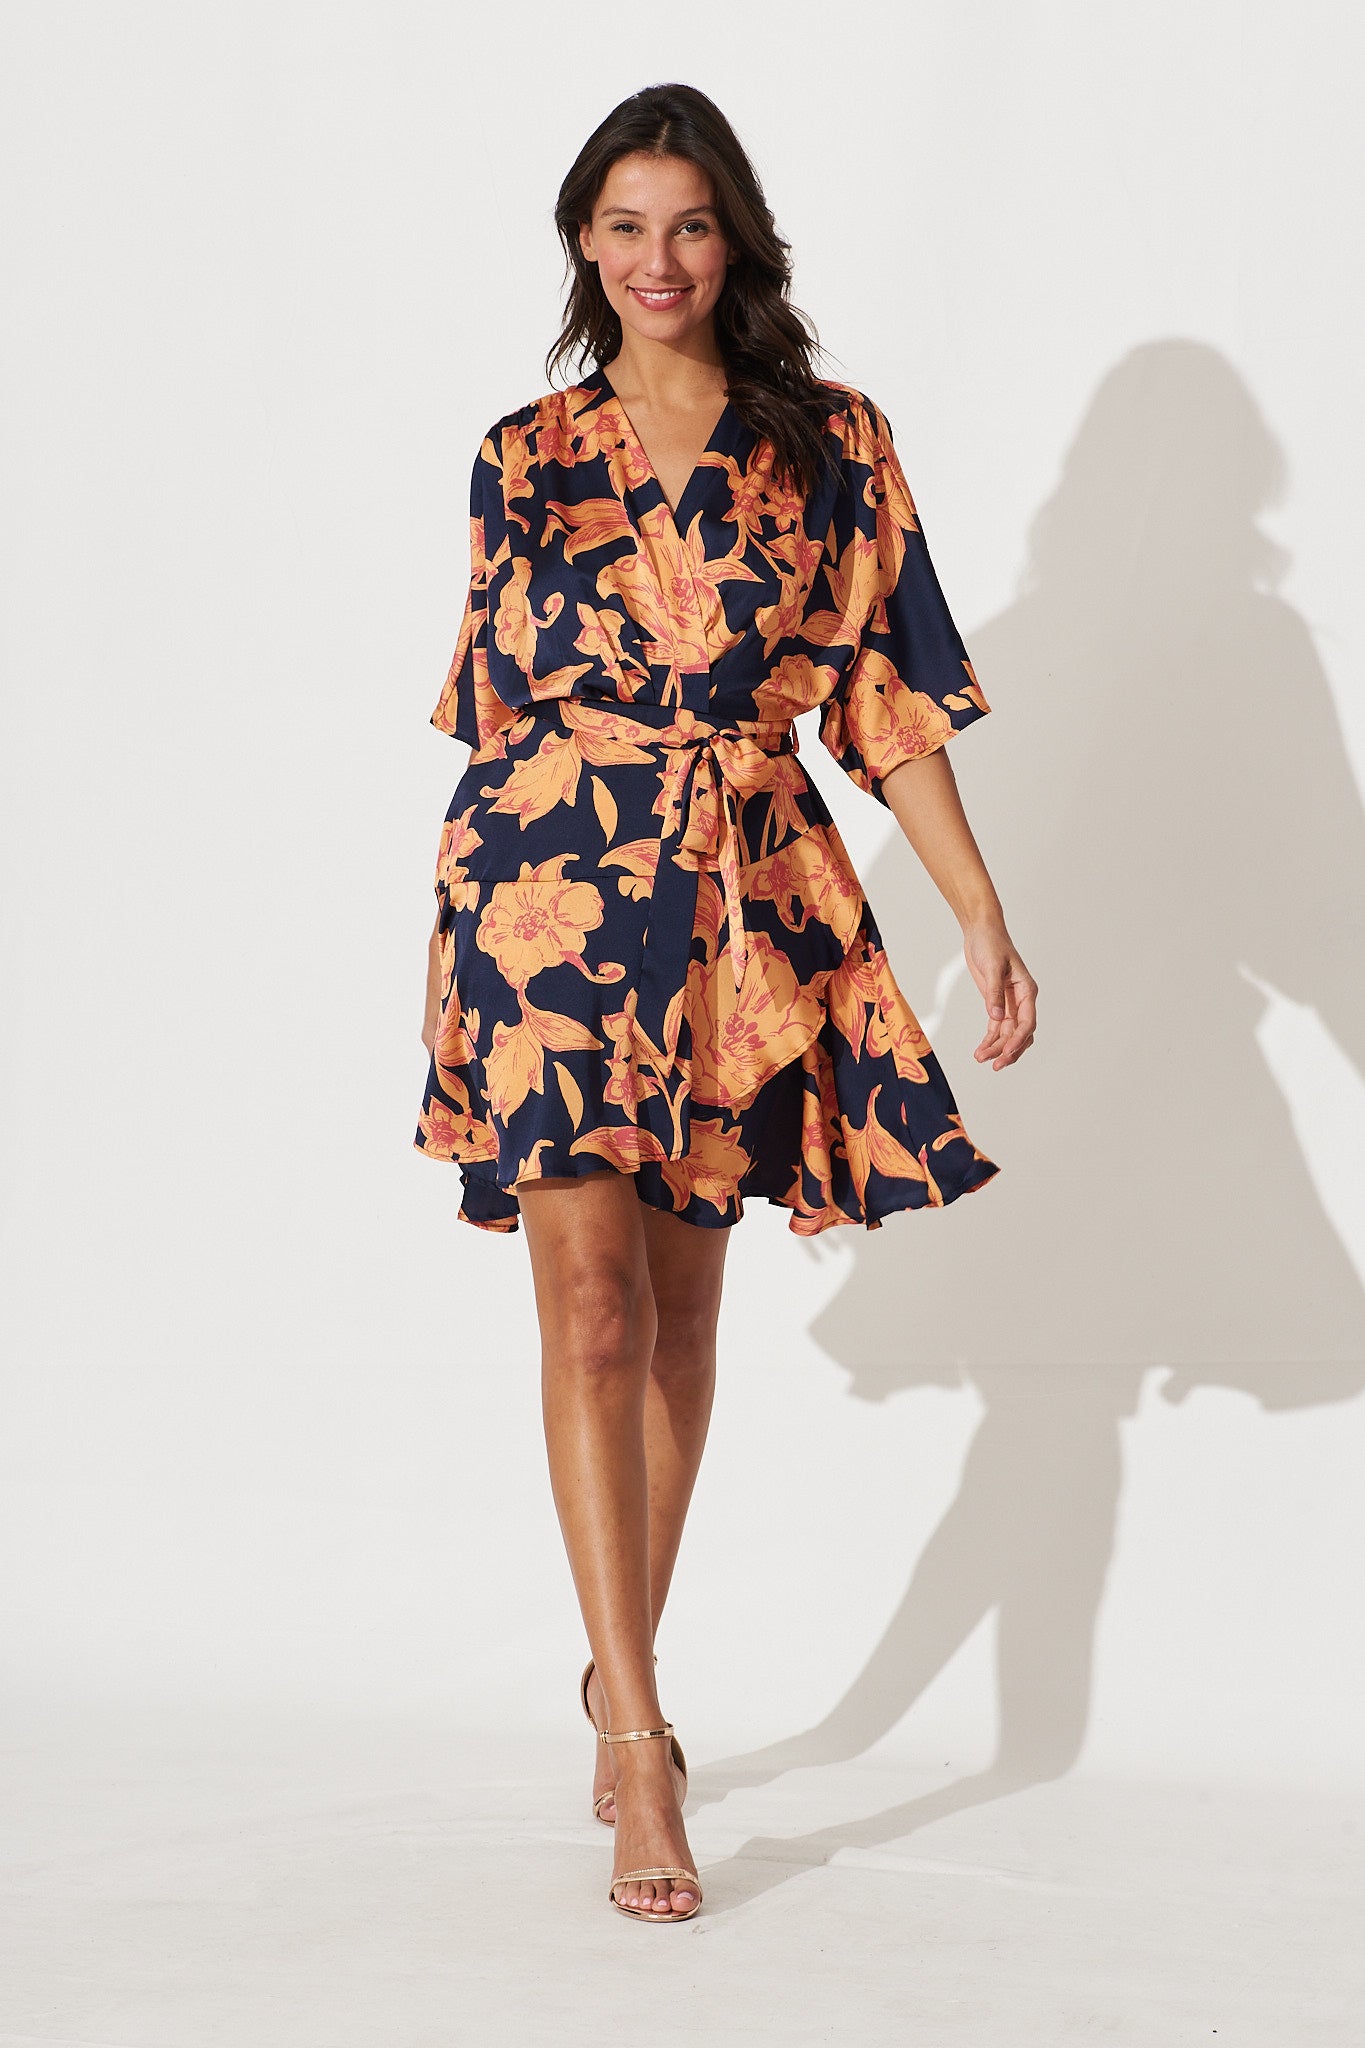 Sunday Dress In Navy With Apricot Floral Print Satin - full length